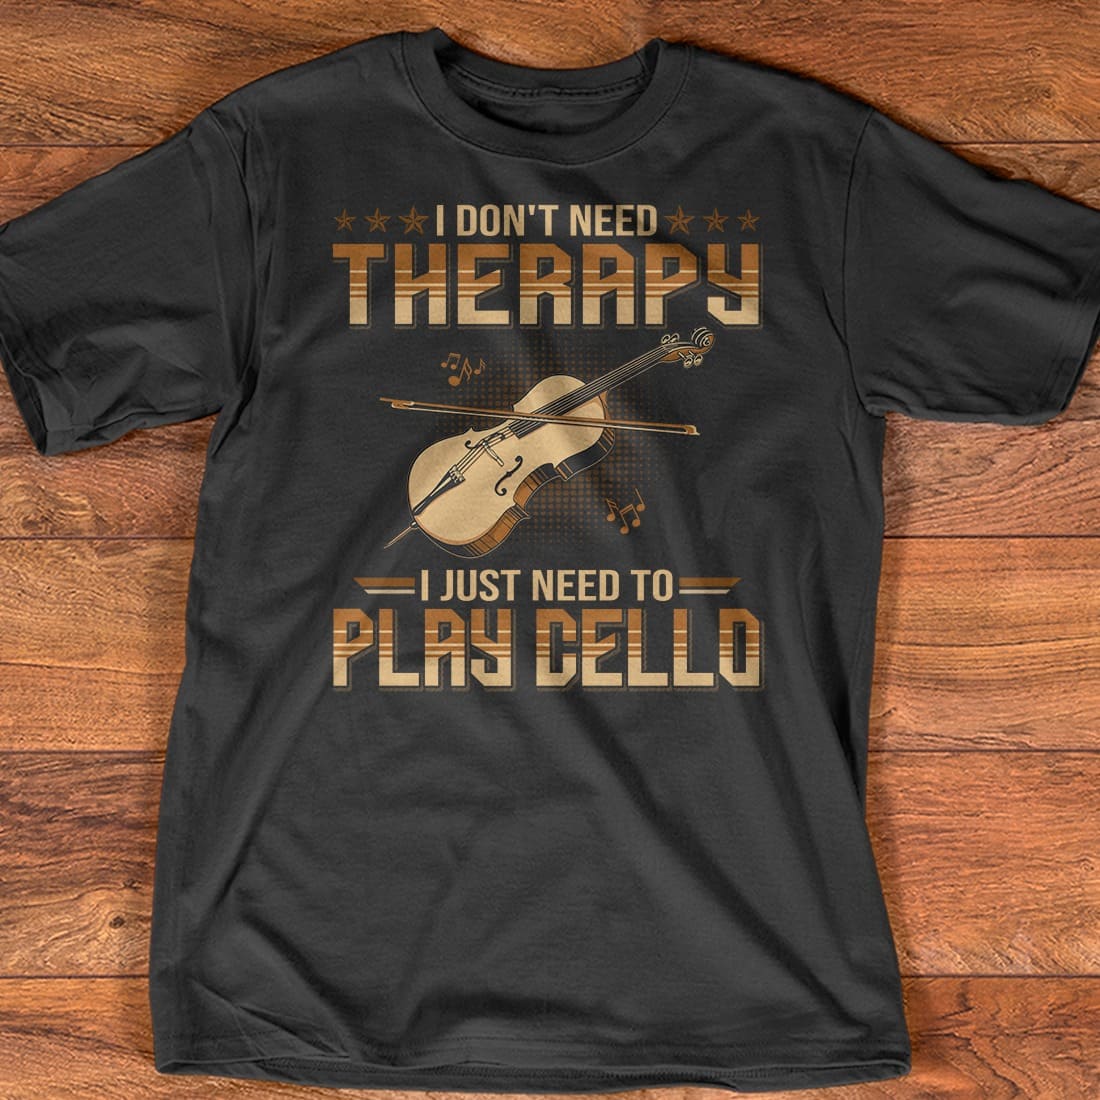 I don't need therapy I just need to play cello - Cello the instrument